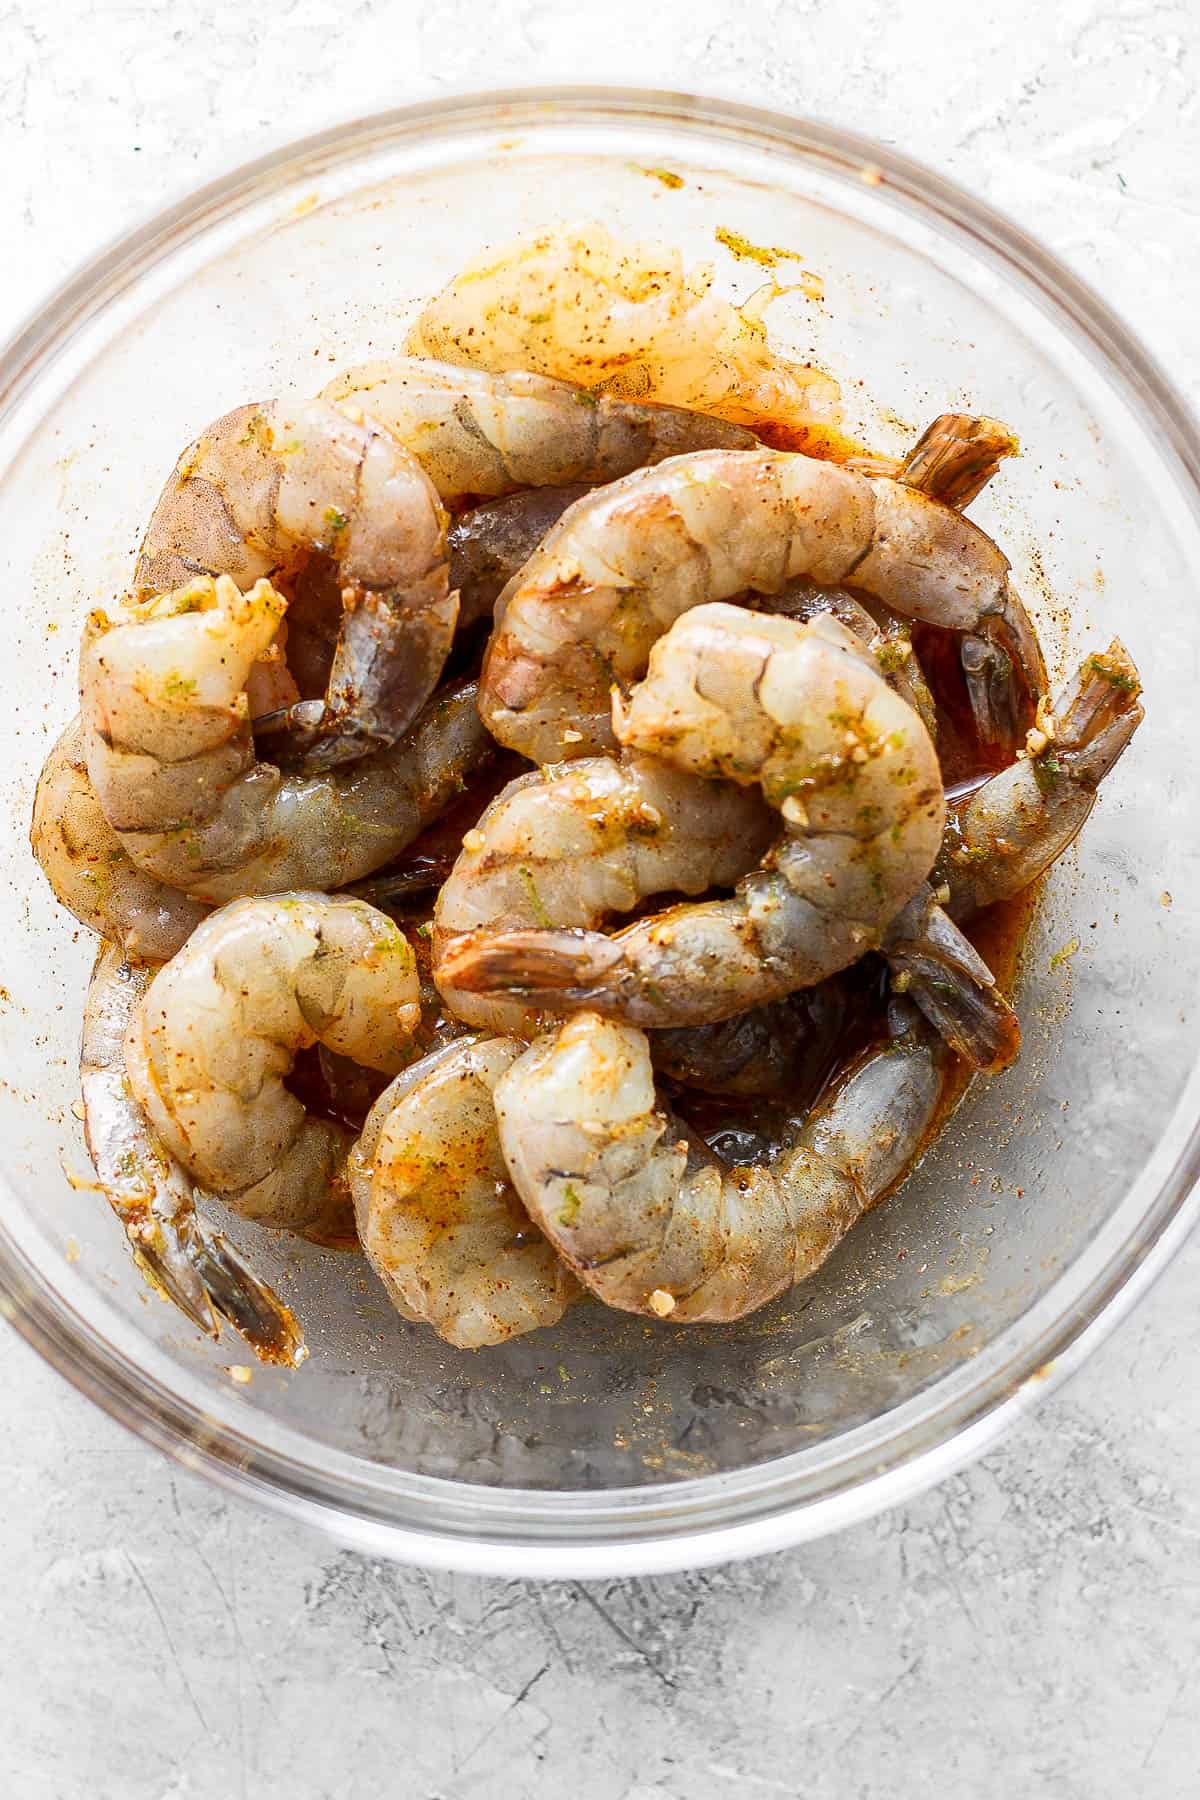 Shrimp marinating in a large glass bowl.